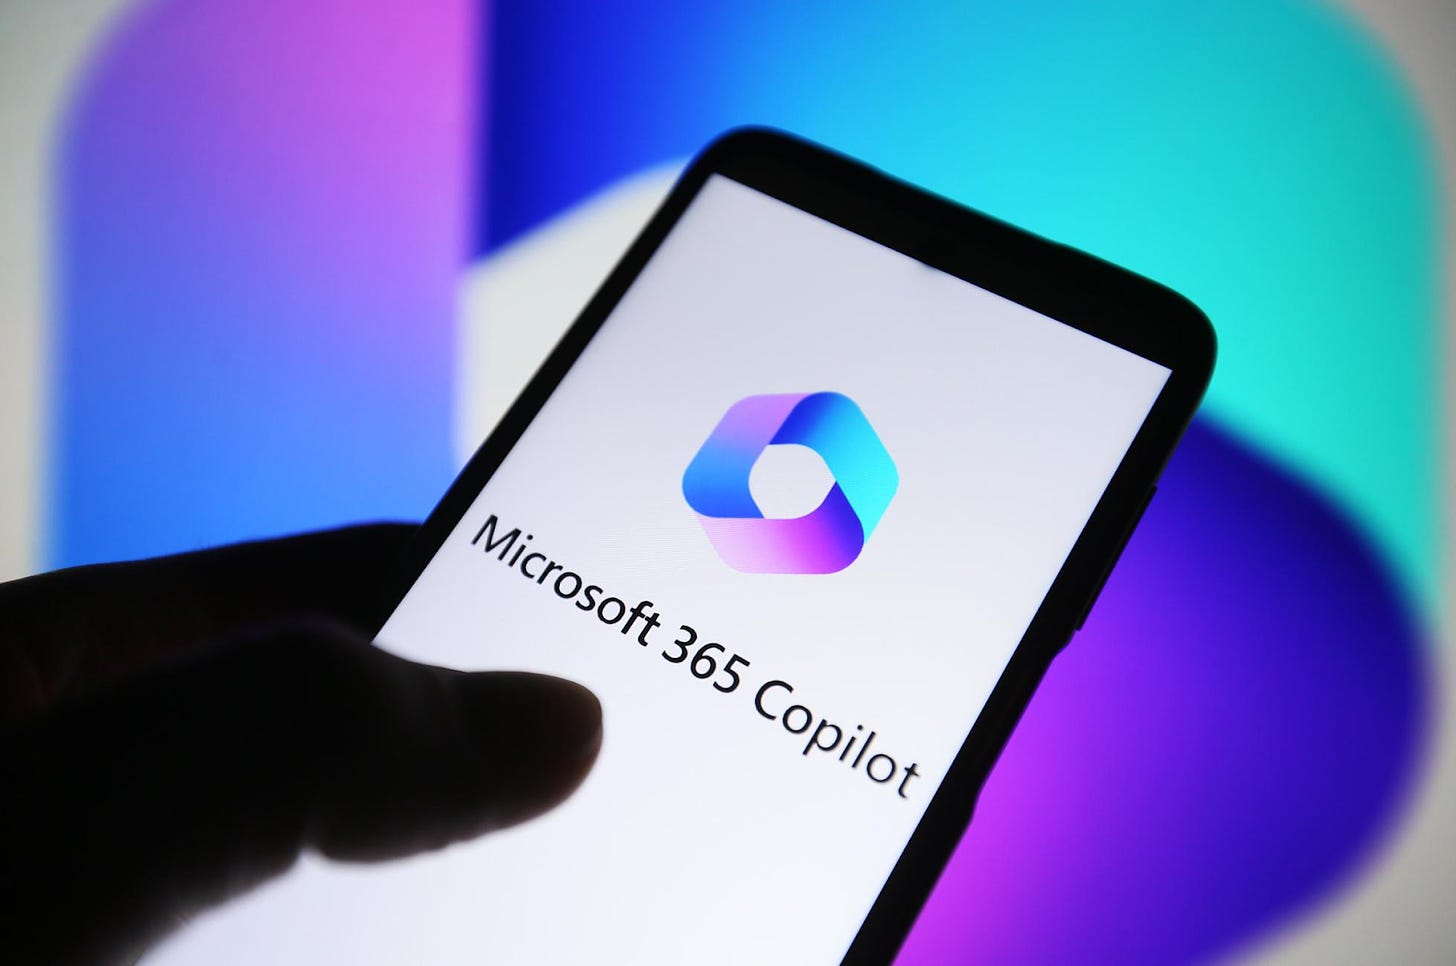 Image 4: Microsoft Copilot Logo on a phone screen being held by a human hand